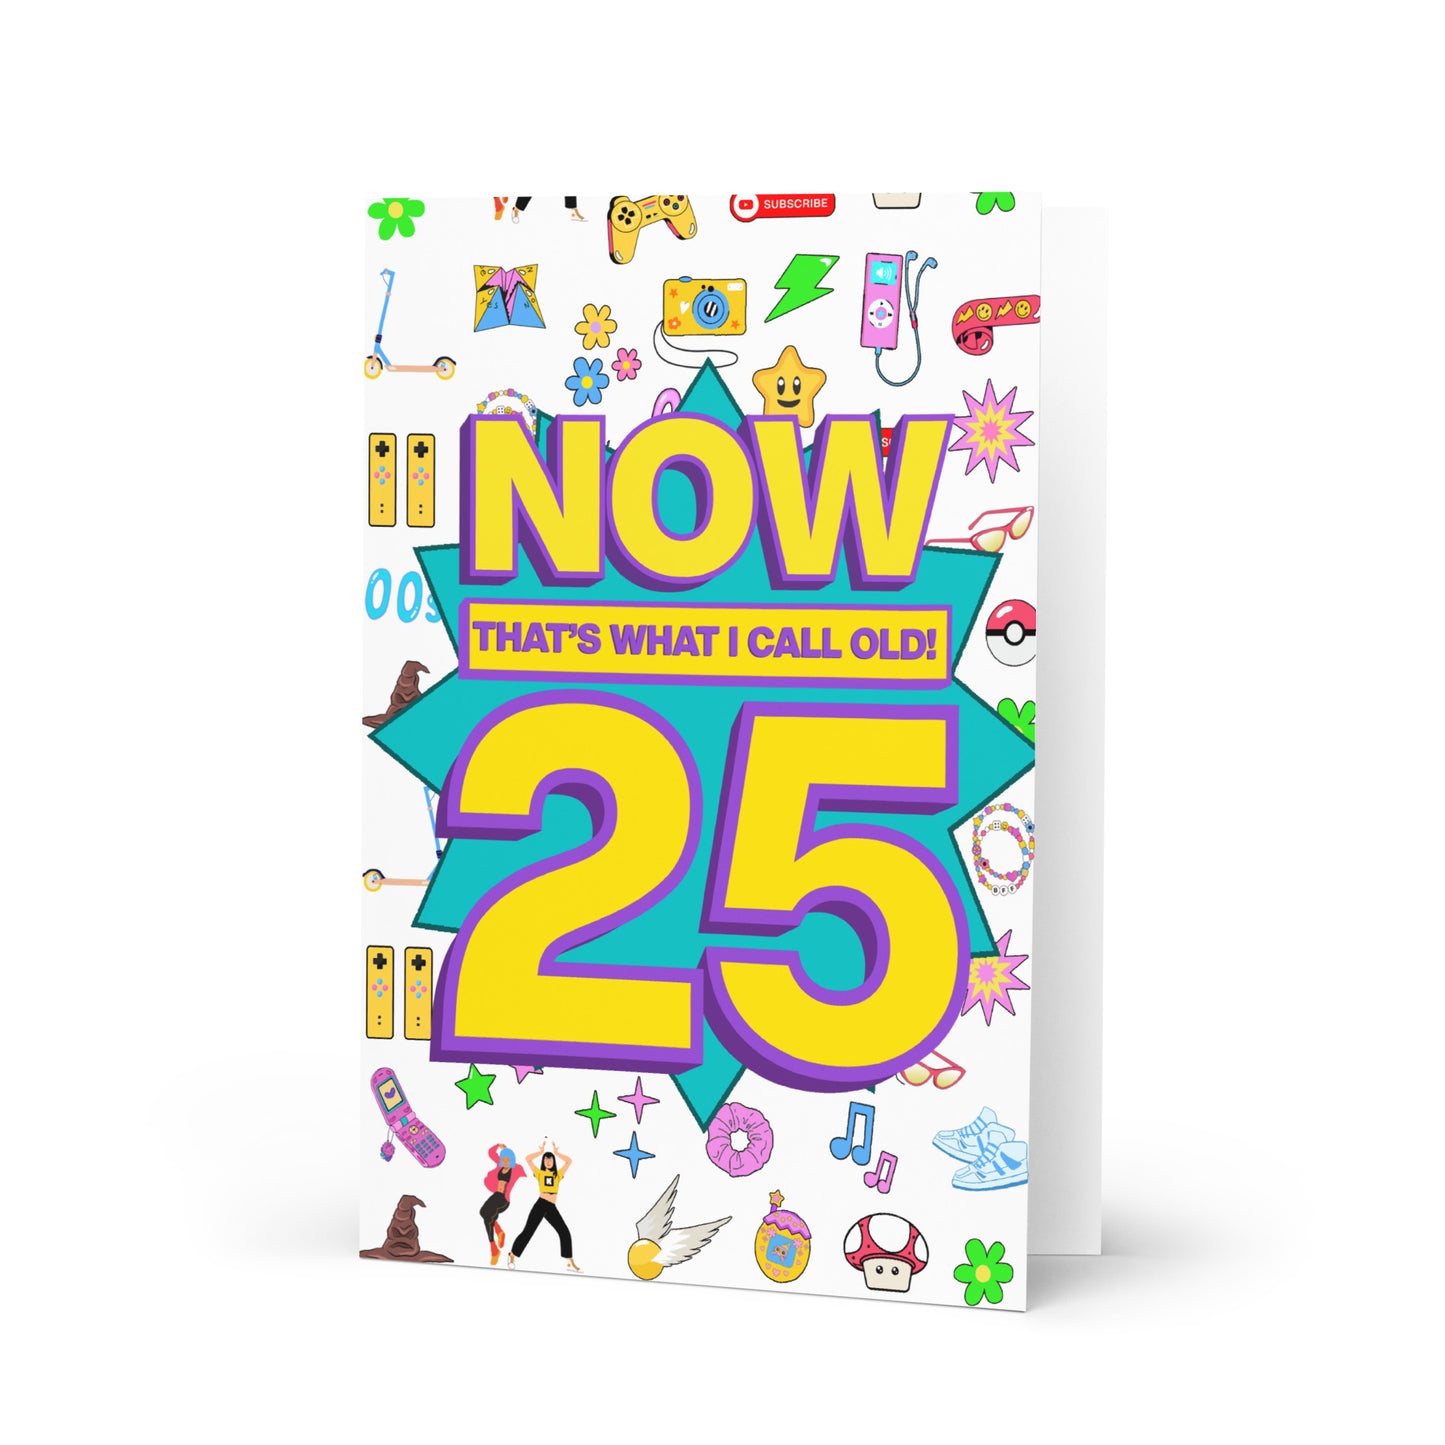 Funny 25th birthday card | now that's what I call old! A5 card | 25 years old